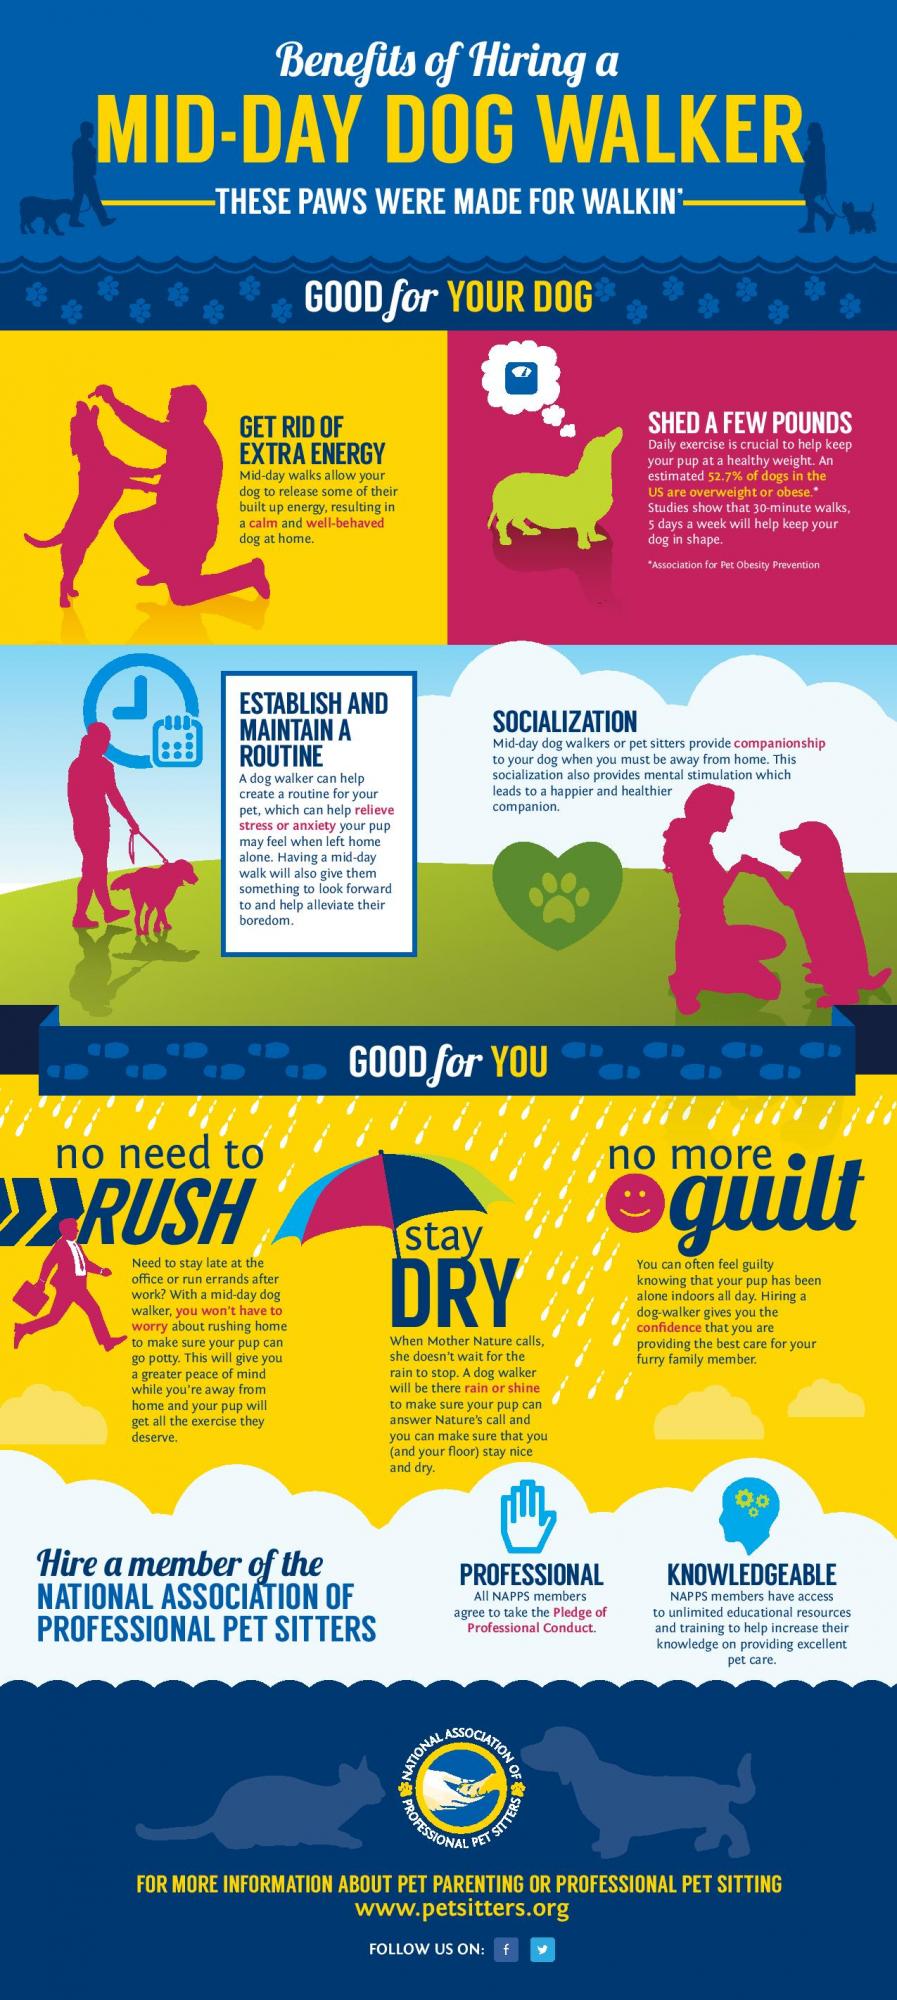 Benefits of Hiring a Mid-Day Dog Walker infographic